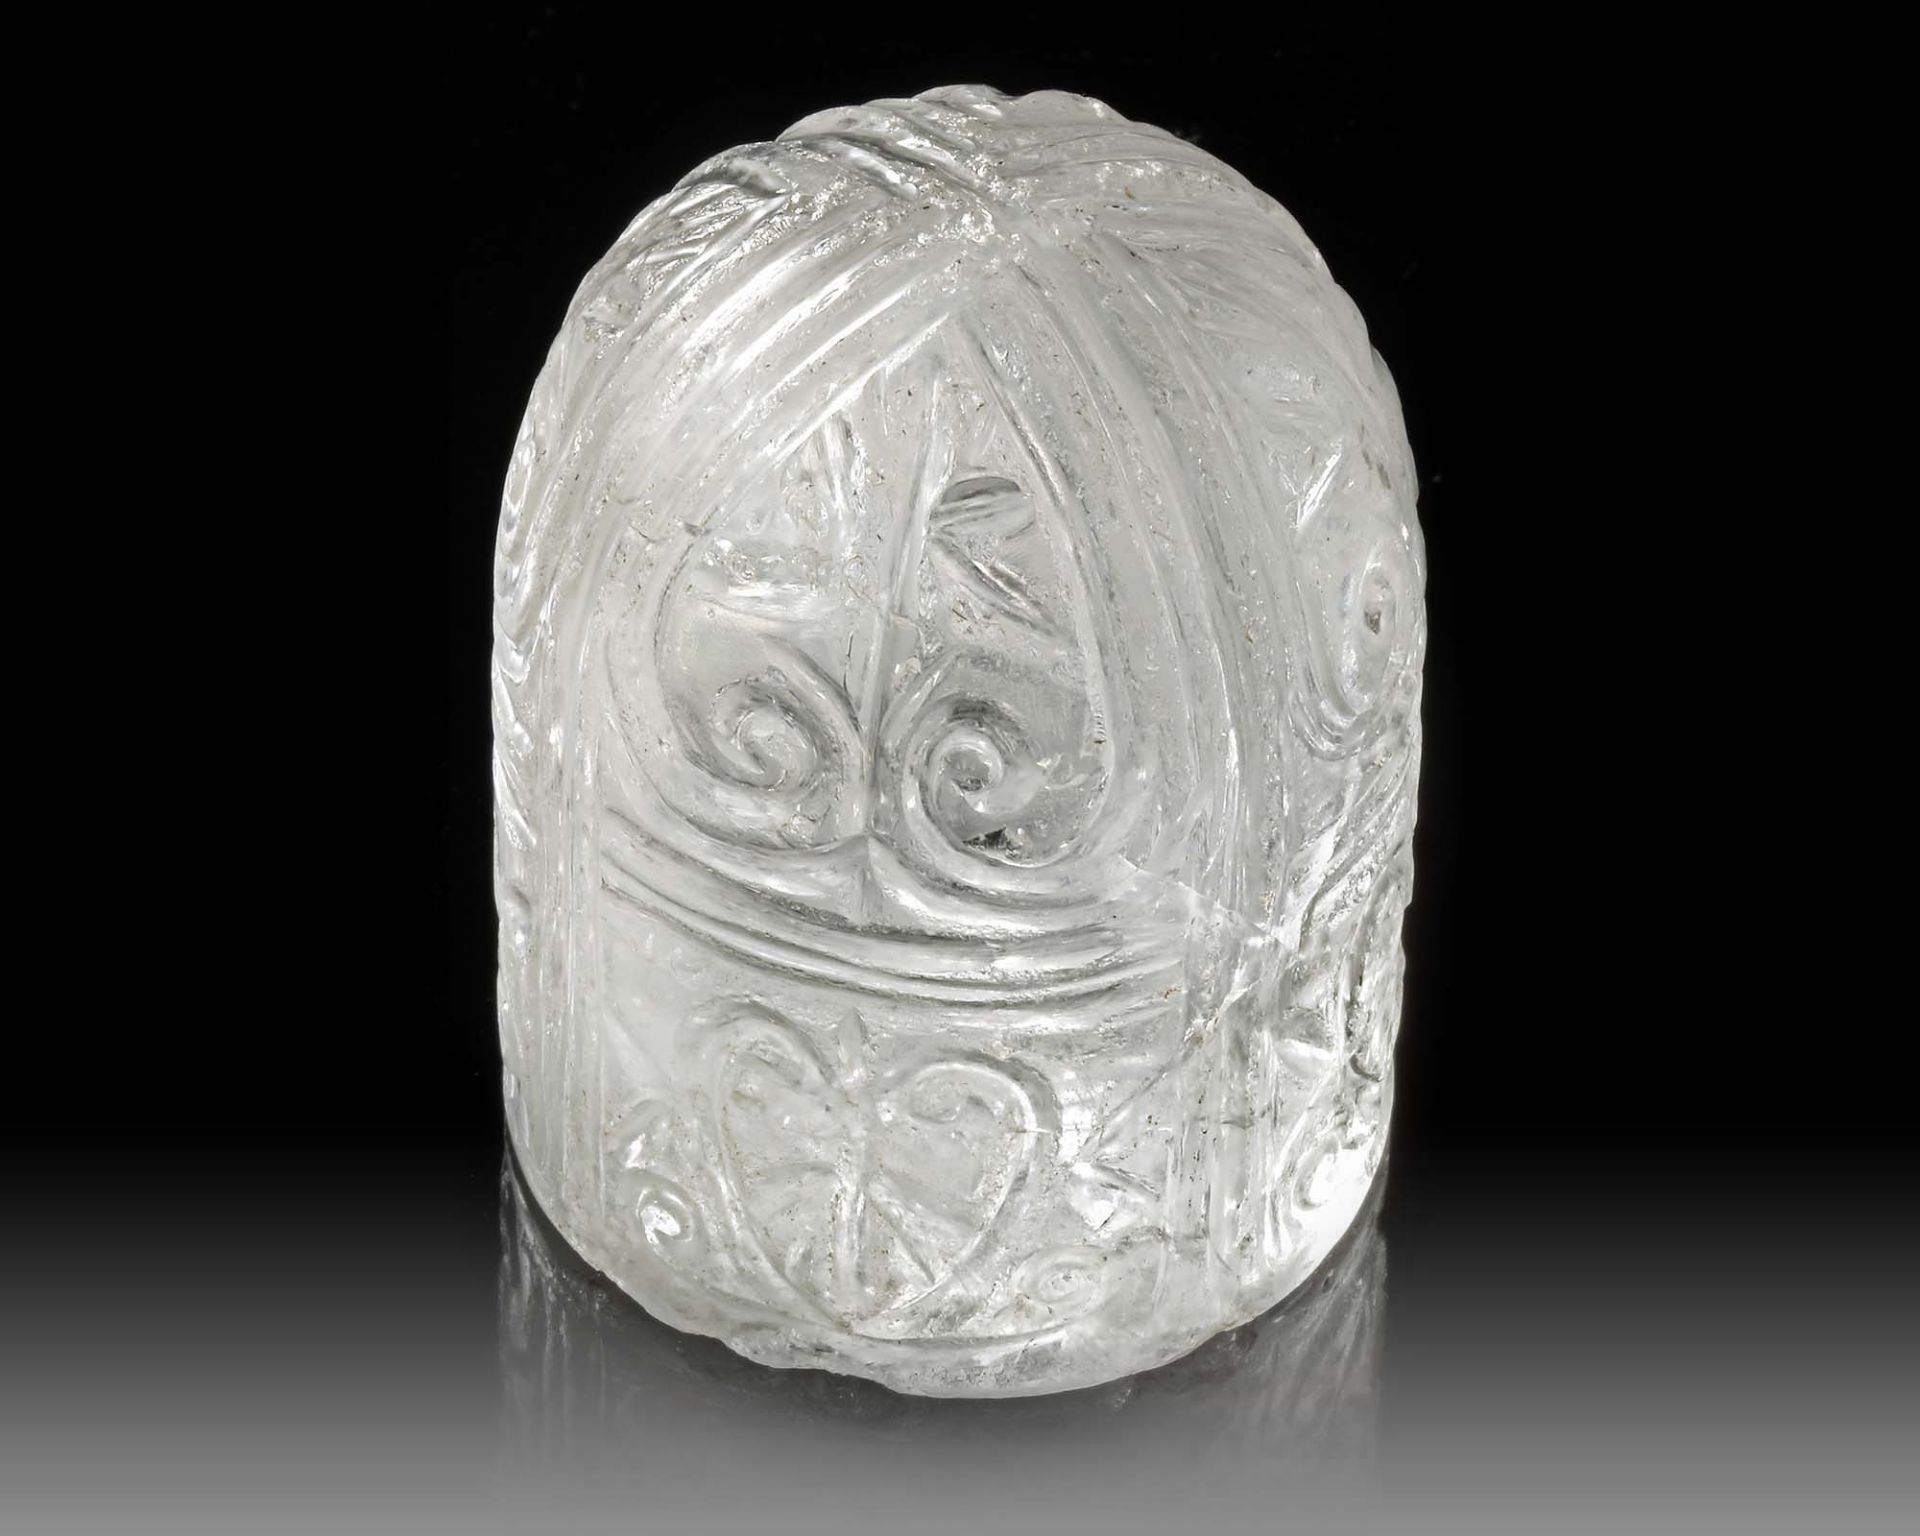 A FATIMID ROCK CRYSTAL CHESS PIECE, EGYPT, 11TH CENTURY - Image 5 of 8